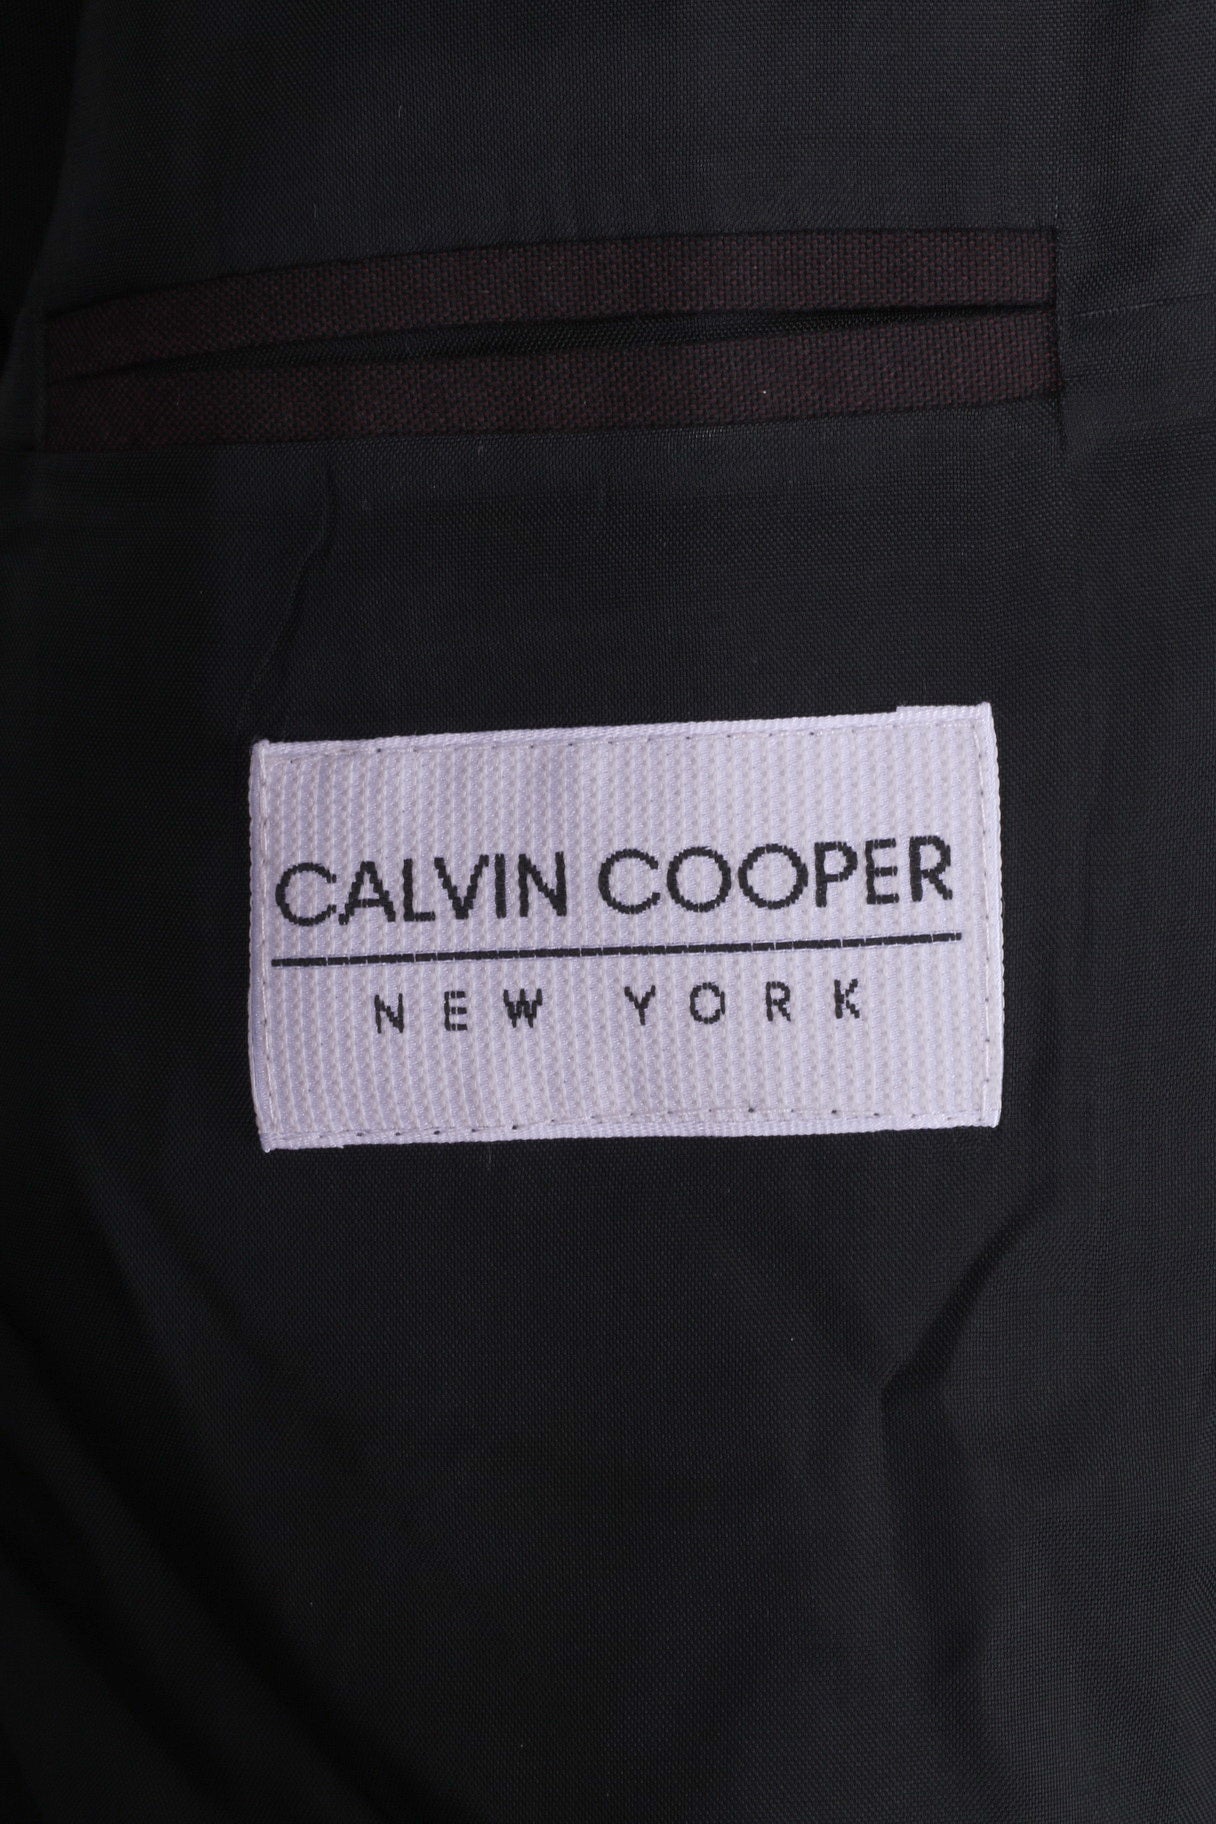 Calvin Cooper New York Men 54 44 Suit Brown Blazer Single Breasted Trousers Wool 2 Piece